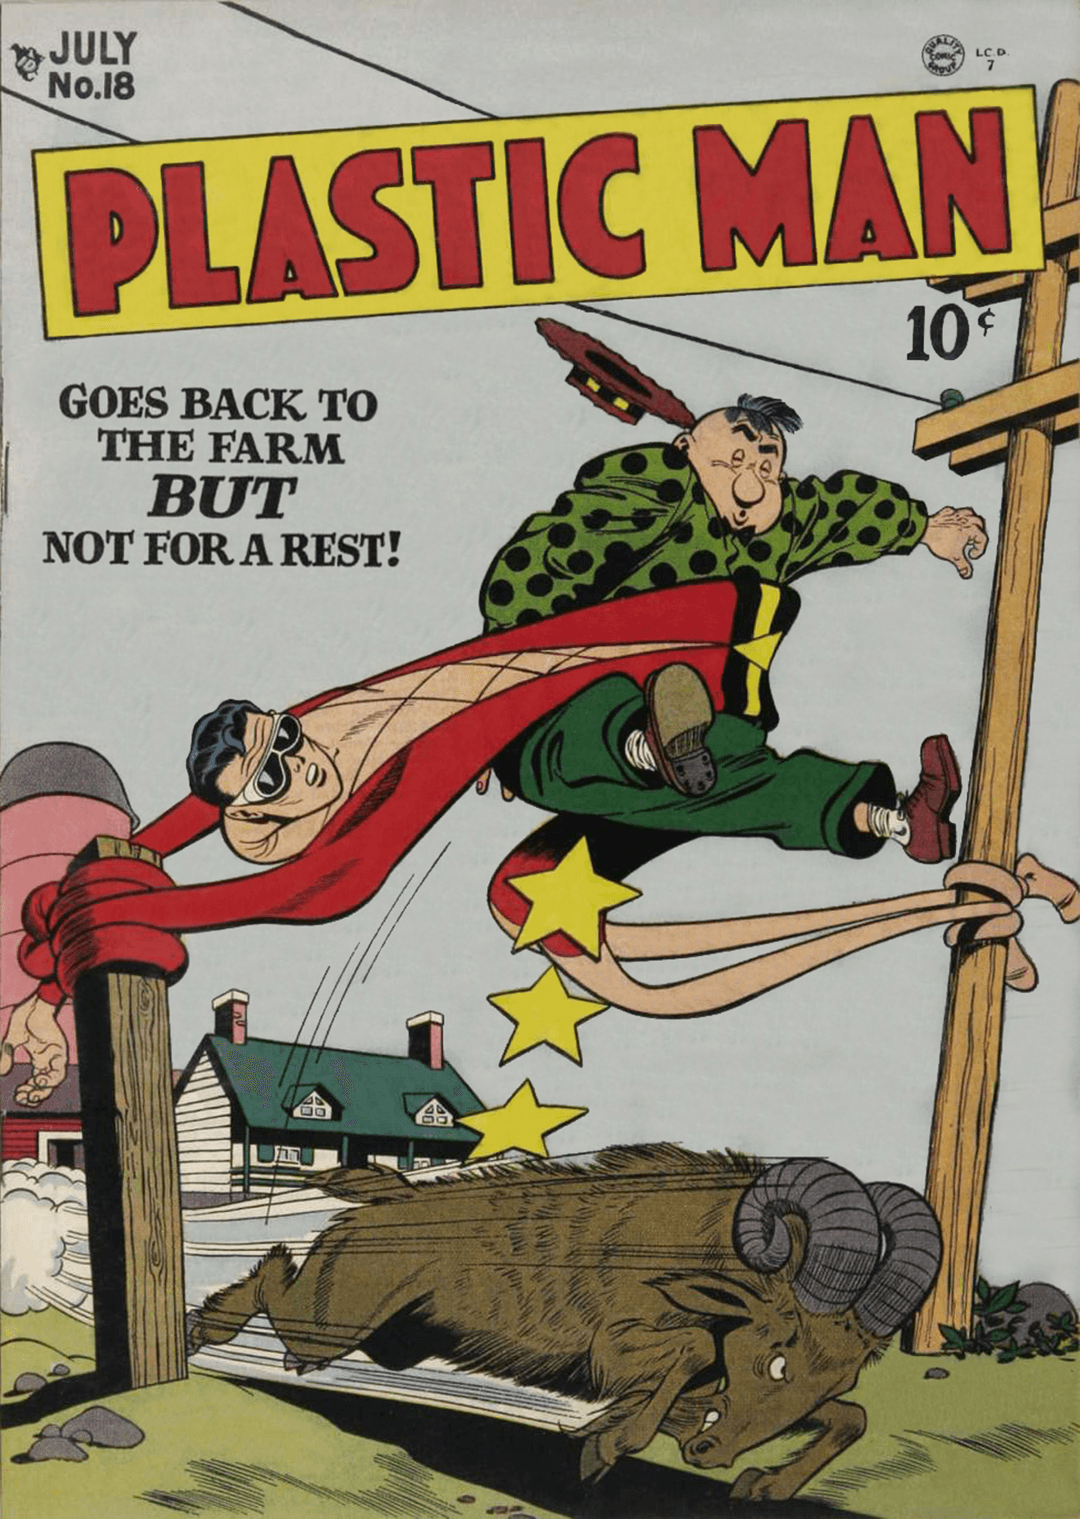 Plastic Man at the Farm #1 - Making Money image number 0